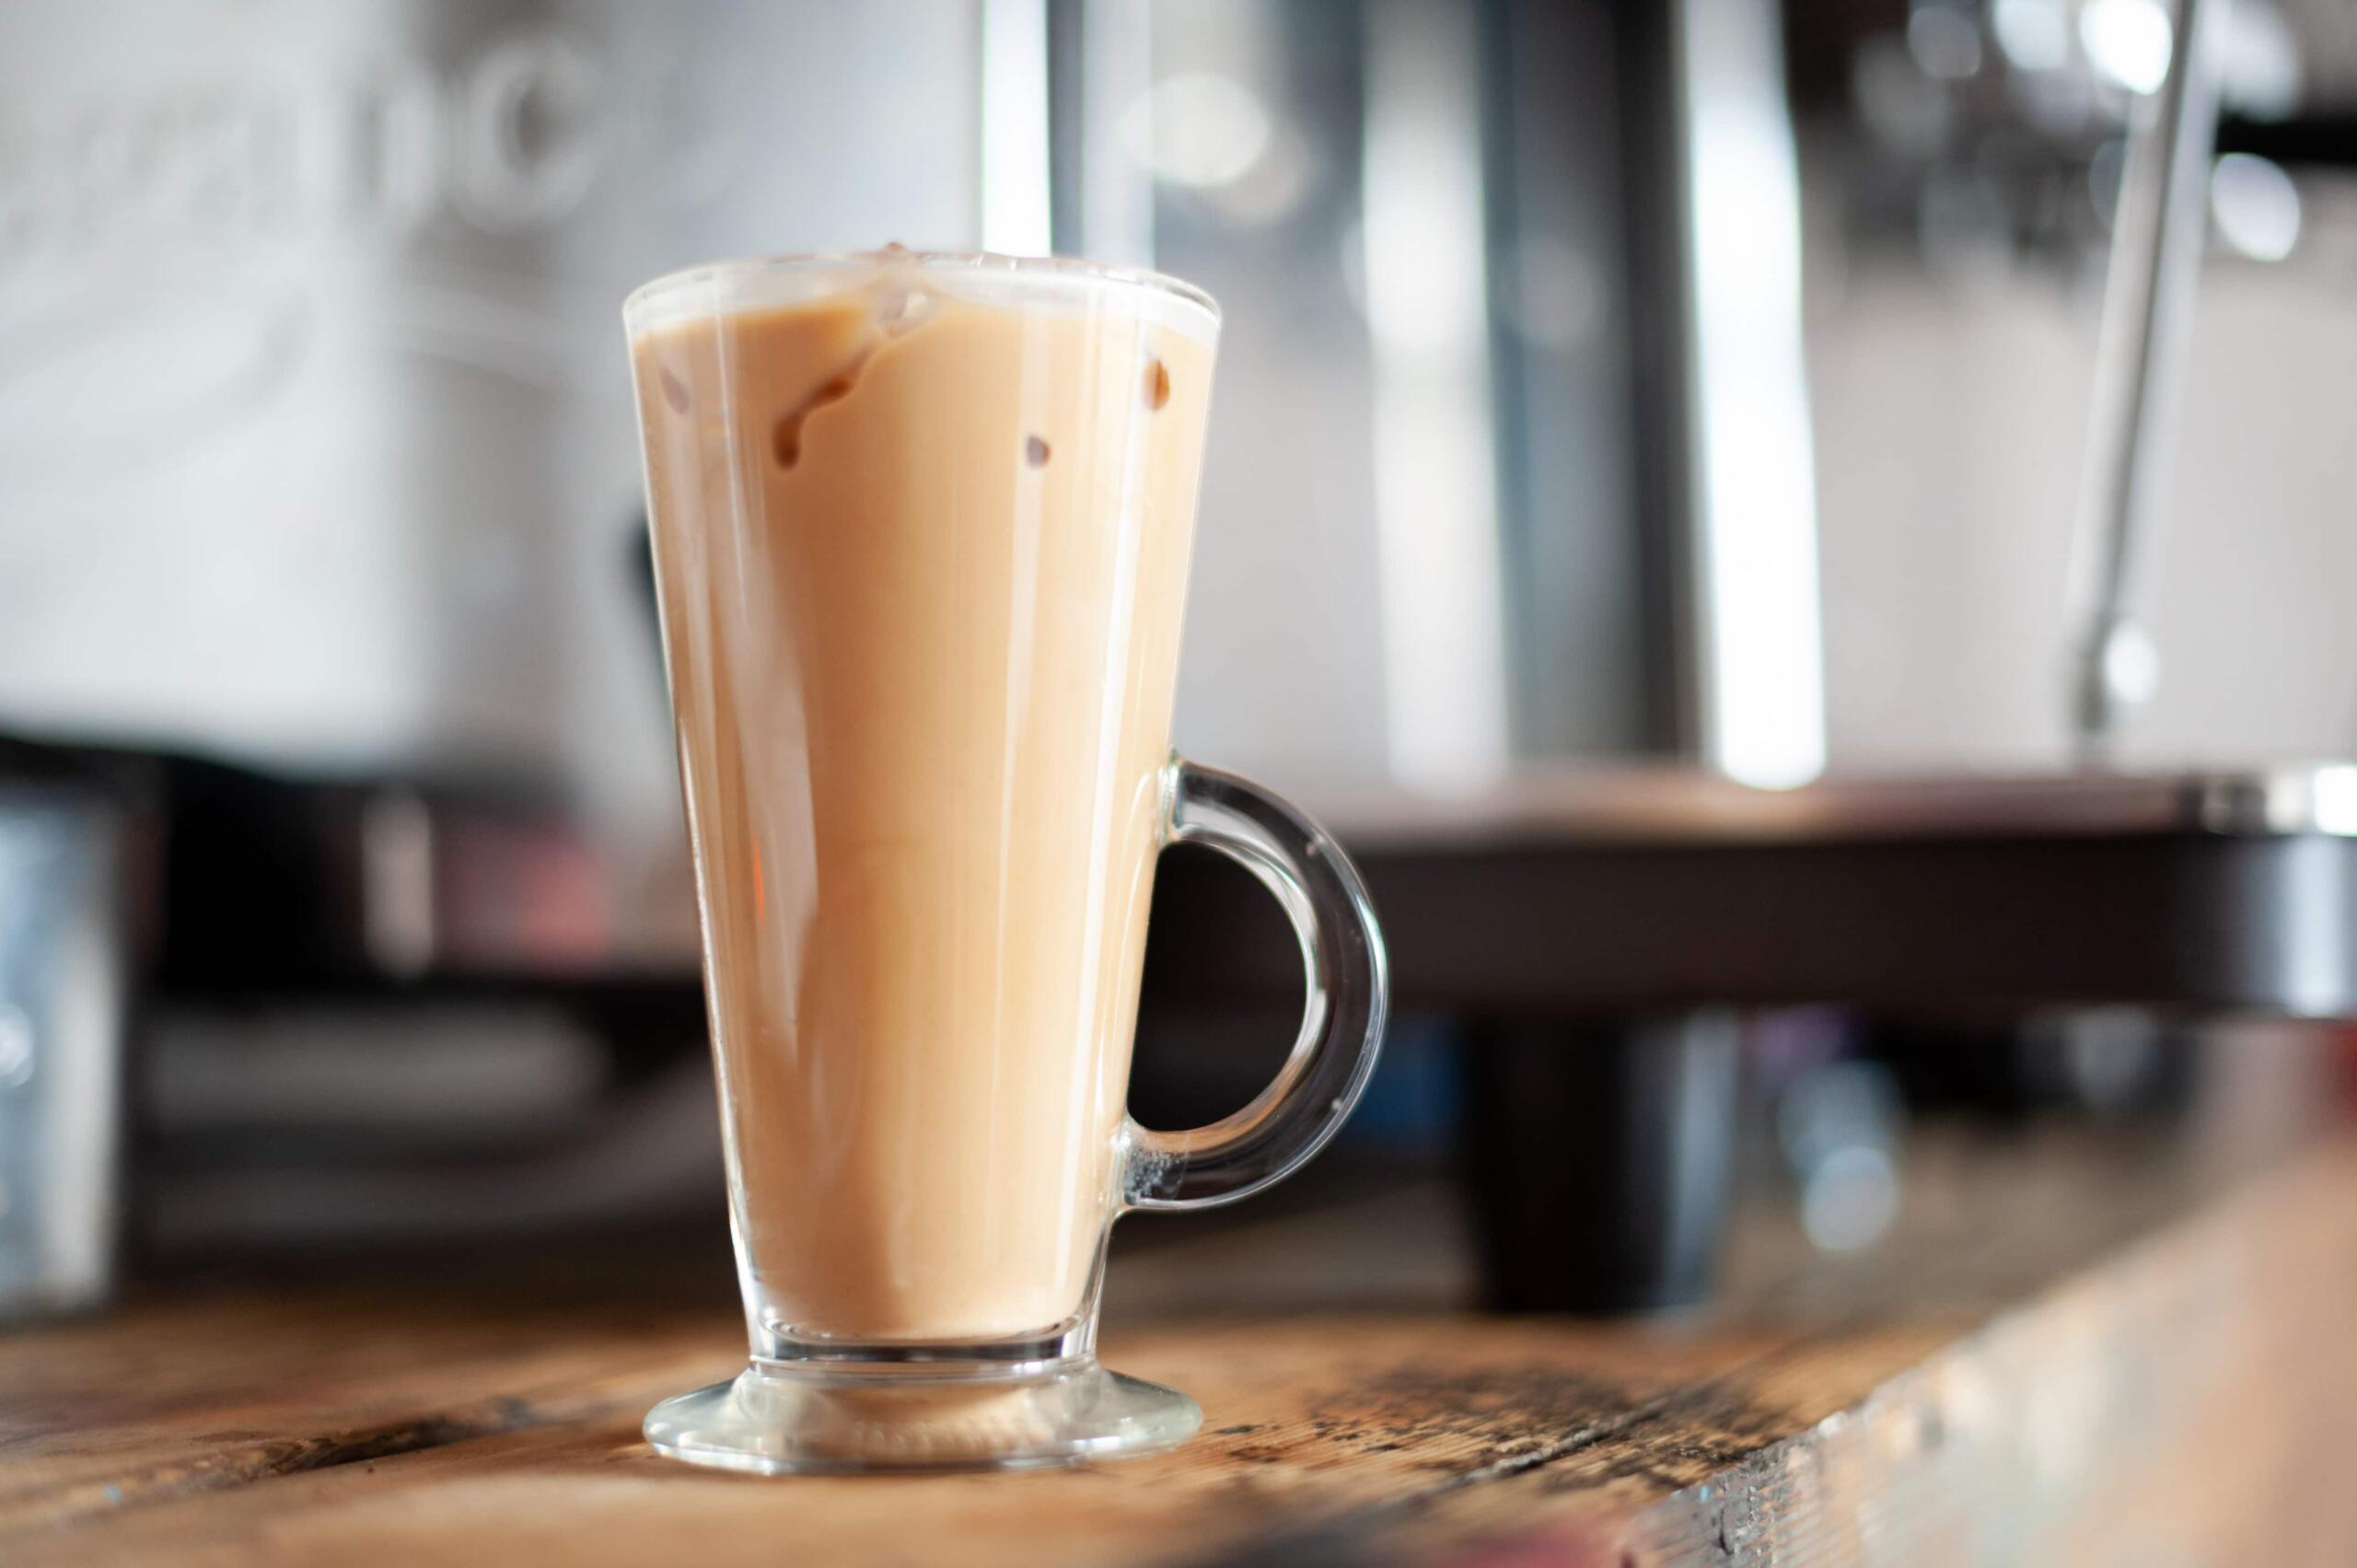 A tall glass filled with iced coffee